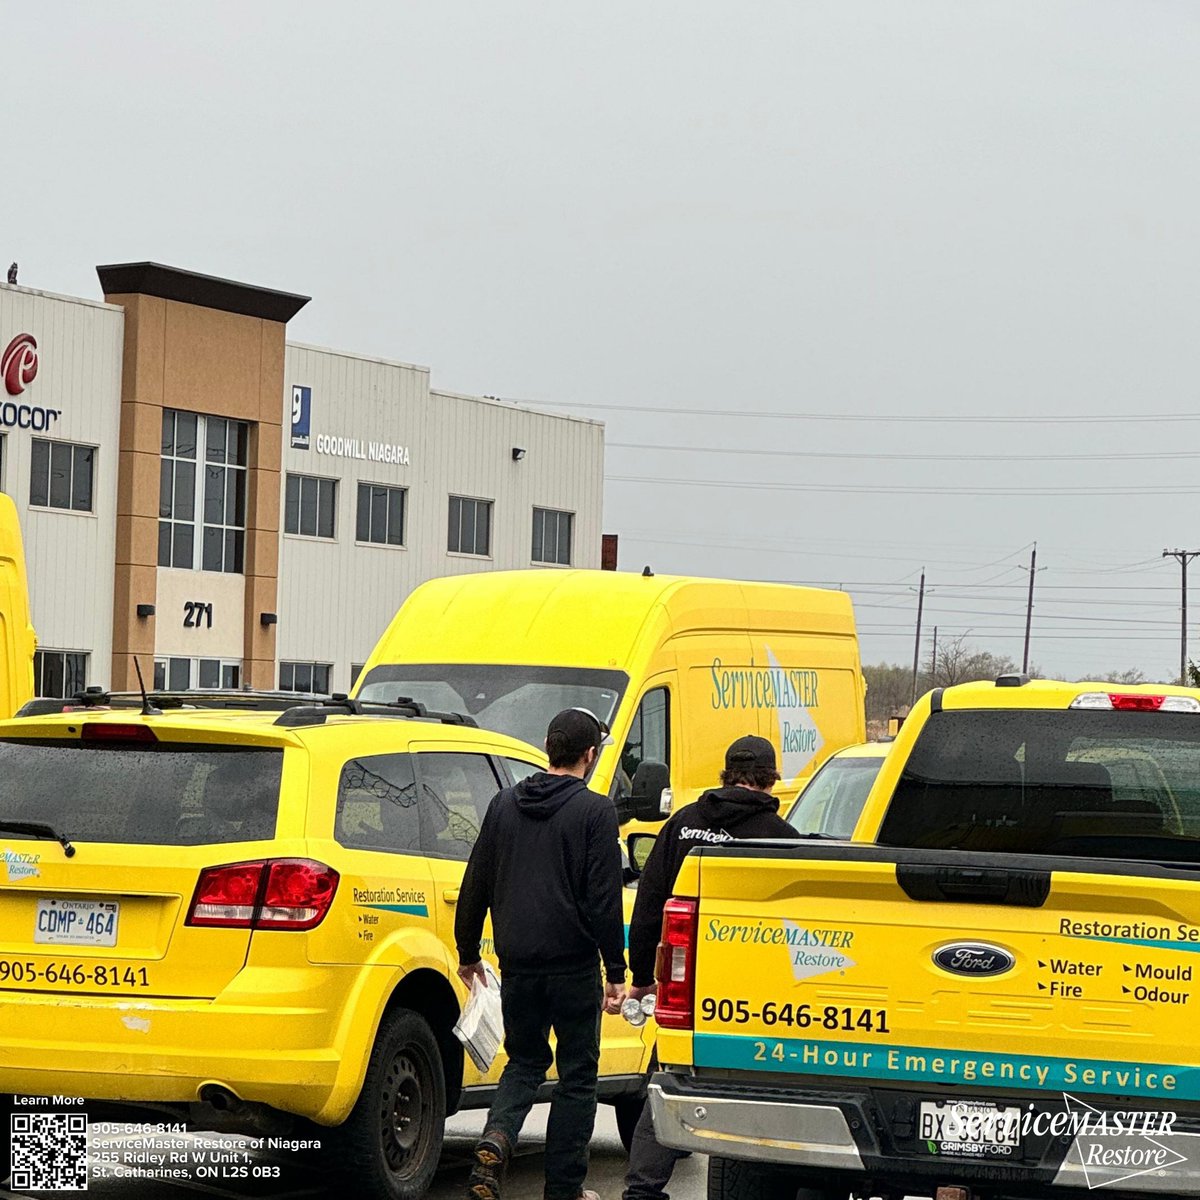 Our crews preparing equipment and heading off to their respective job sites on this gloomy Thursday morning. 👏

#Restoration #RestorationServices #Insurance #InsuranceClaims #ServiceMasterRestore #ServiceMasterRestoreOfNiagara